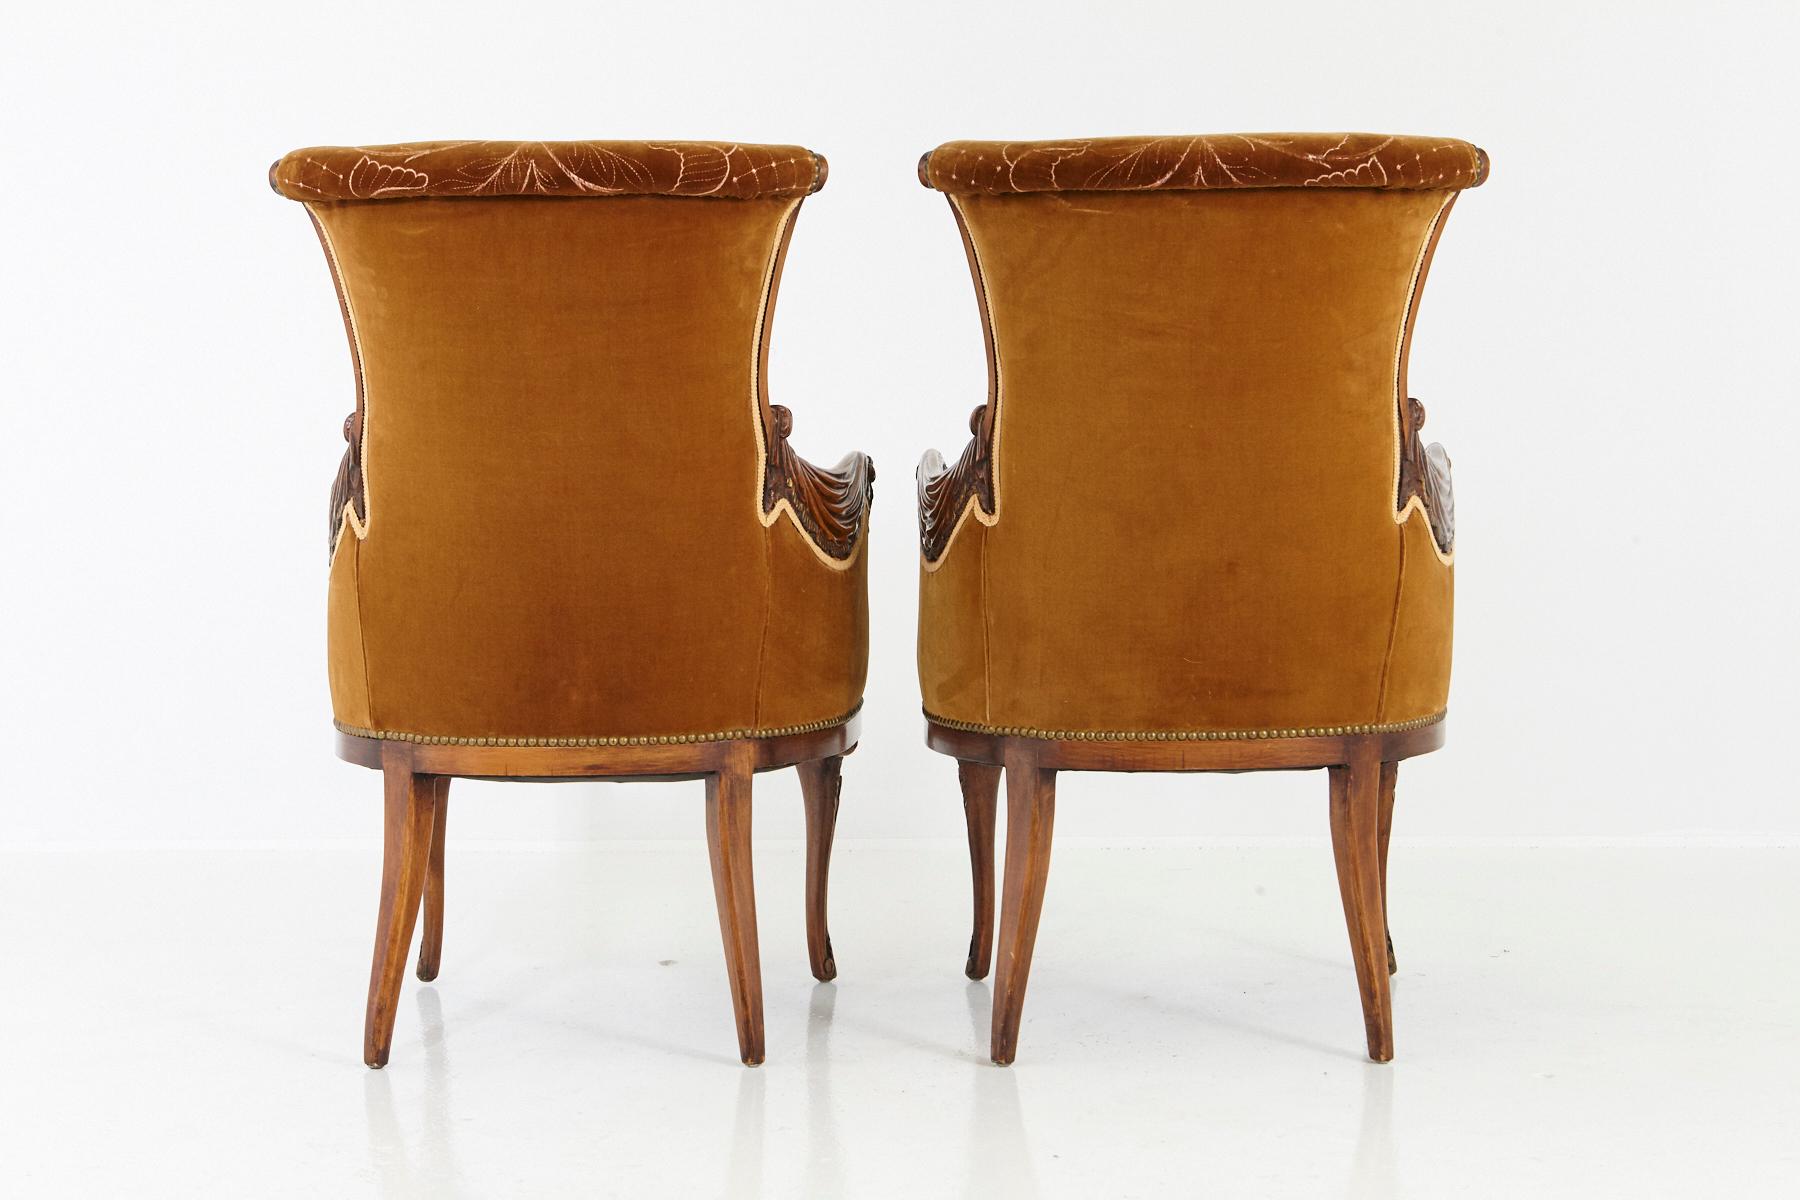 20th Century Pair of French Art Nouveau Armchairs, Two-Tone Cognac Colored Embroidered Velvet